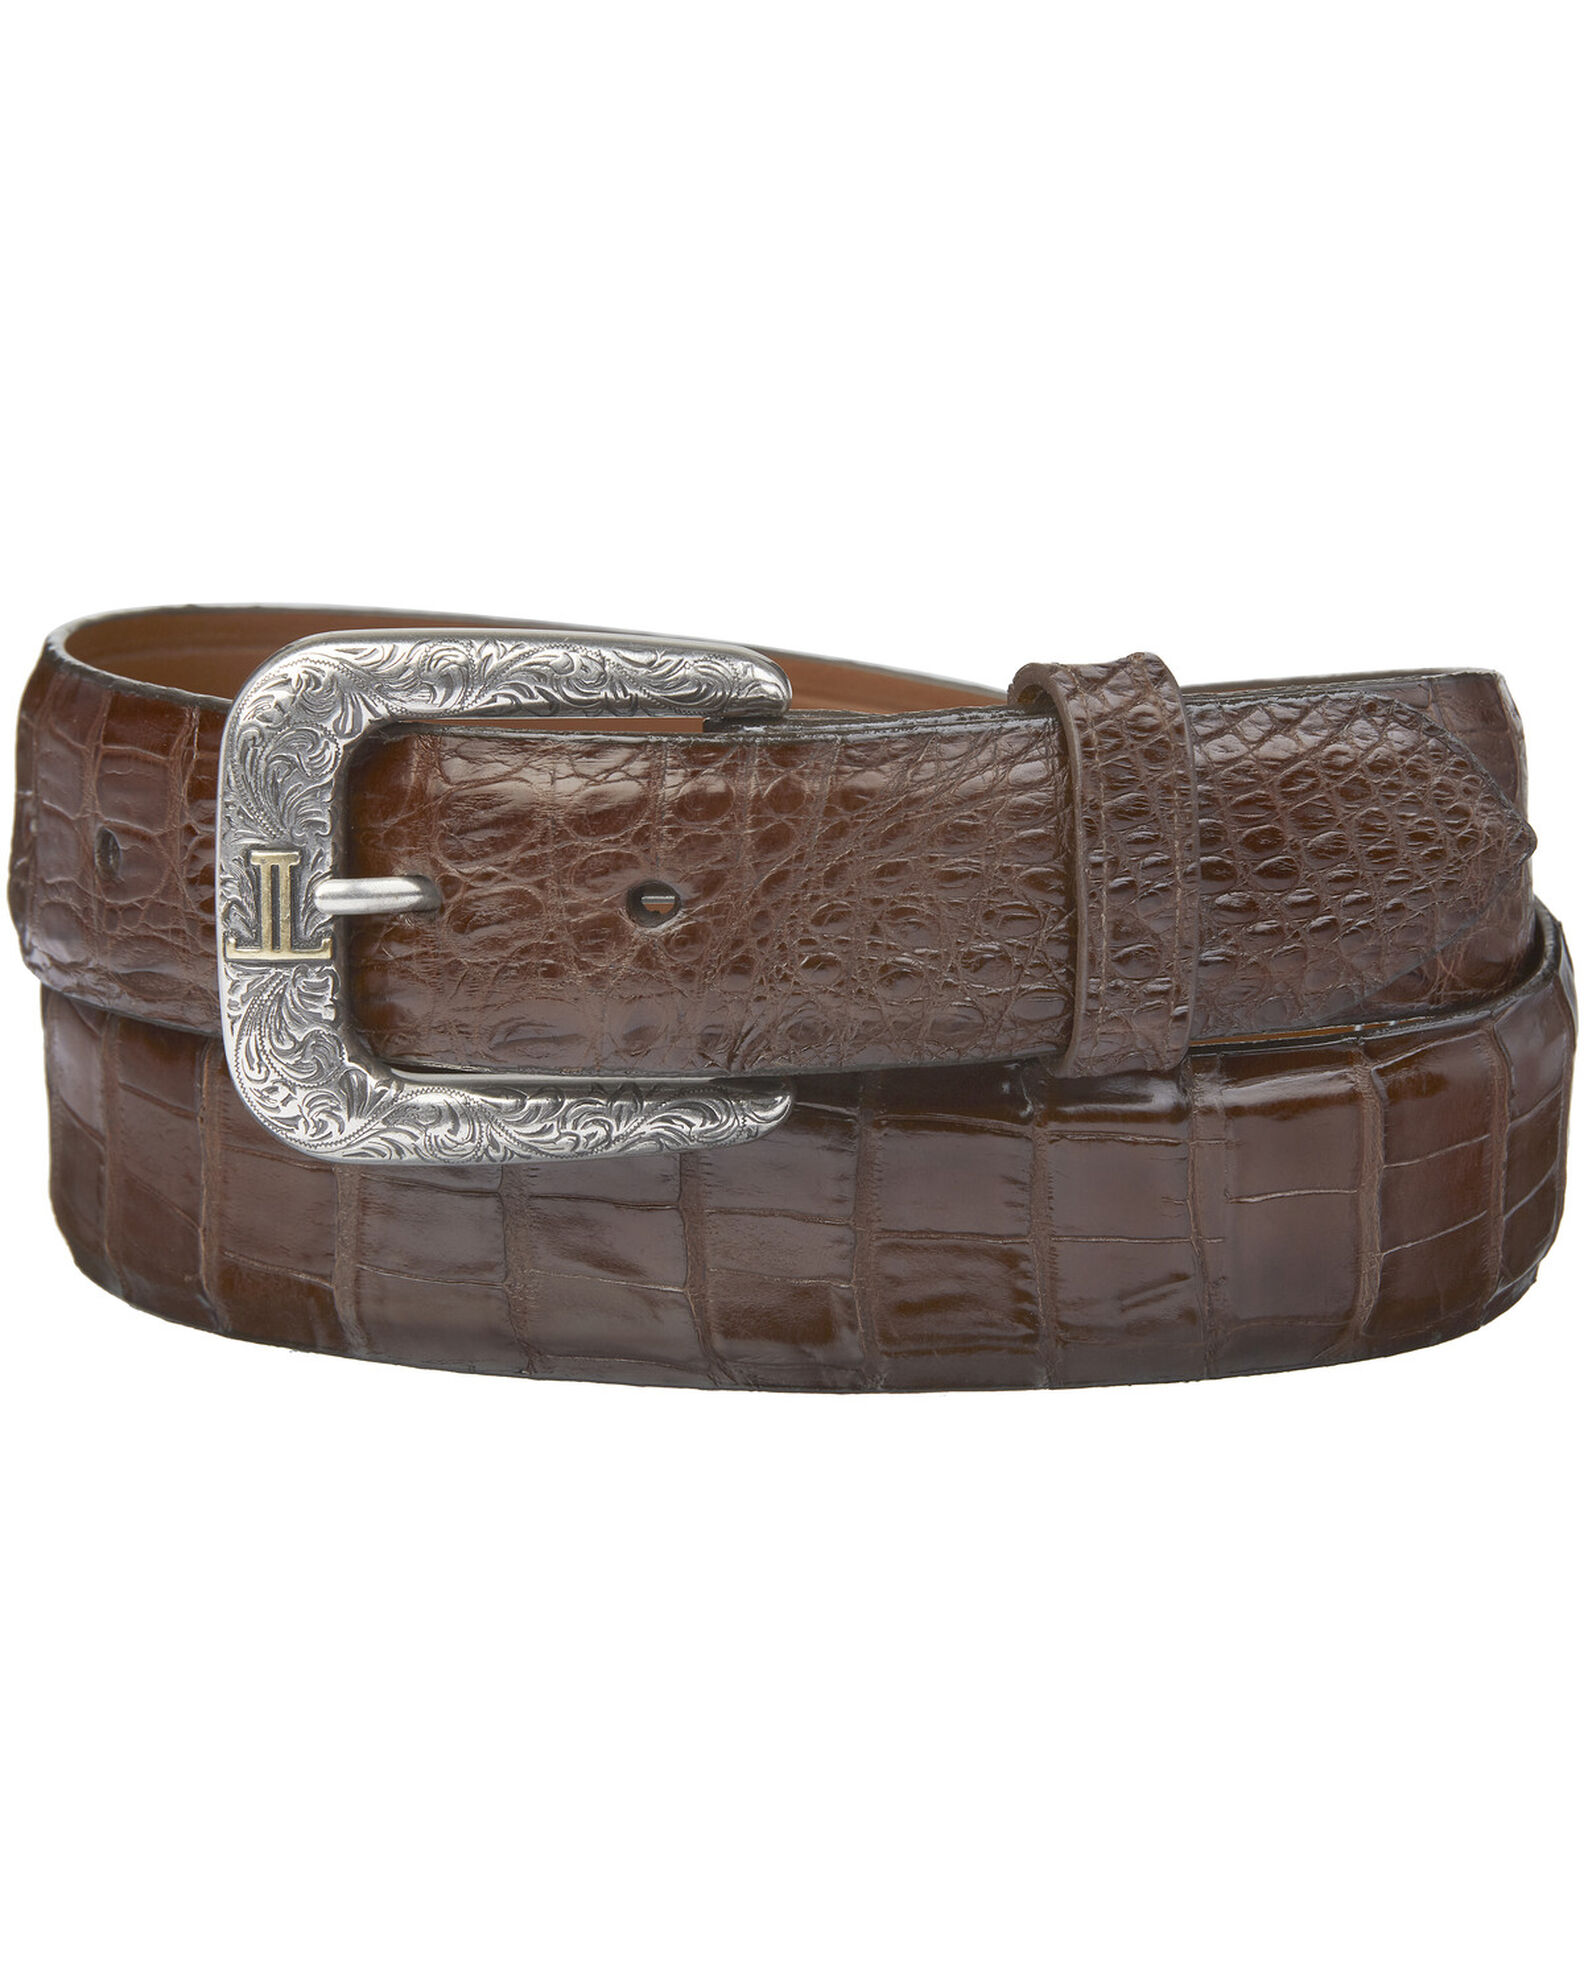 Lucchese Men's Sienna Caiman Ultra Belly Leather Belt - Country